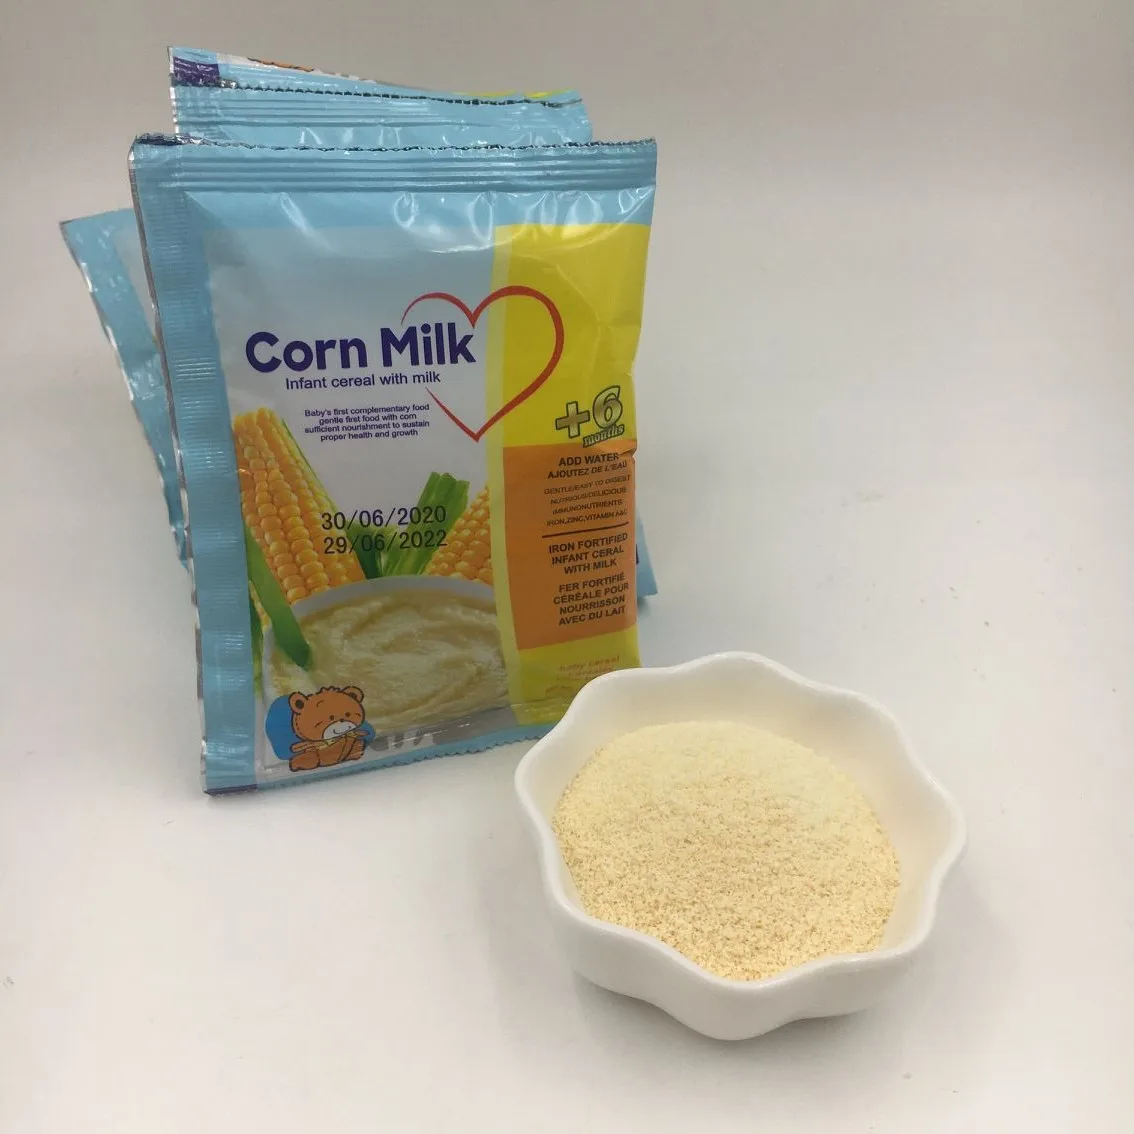 
corn milk powder baby cereal for infant 